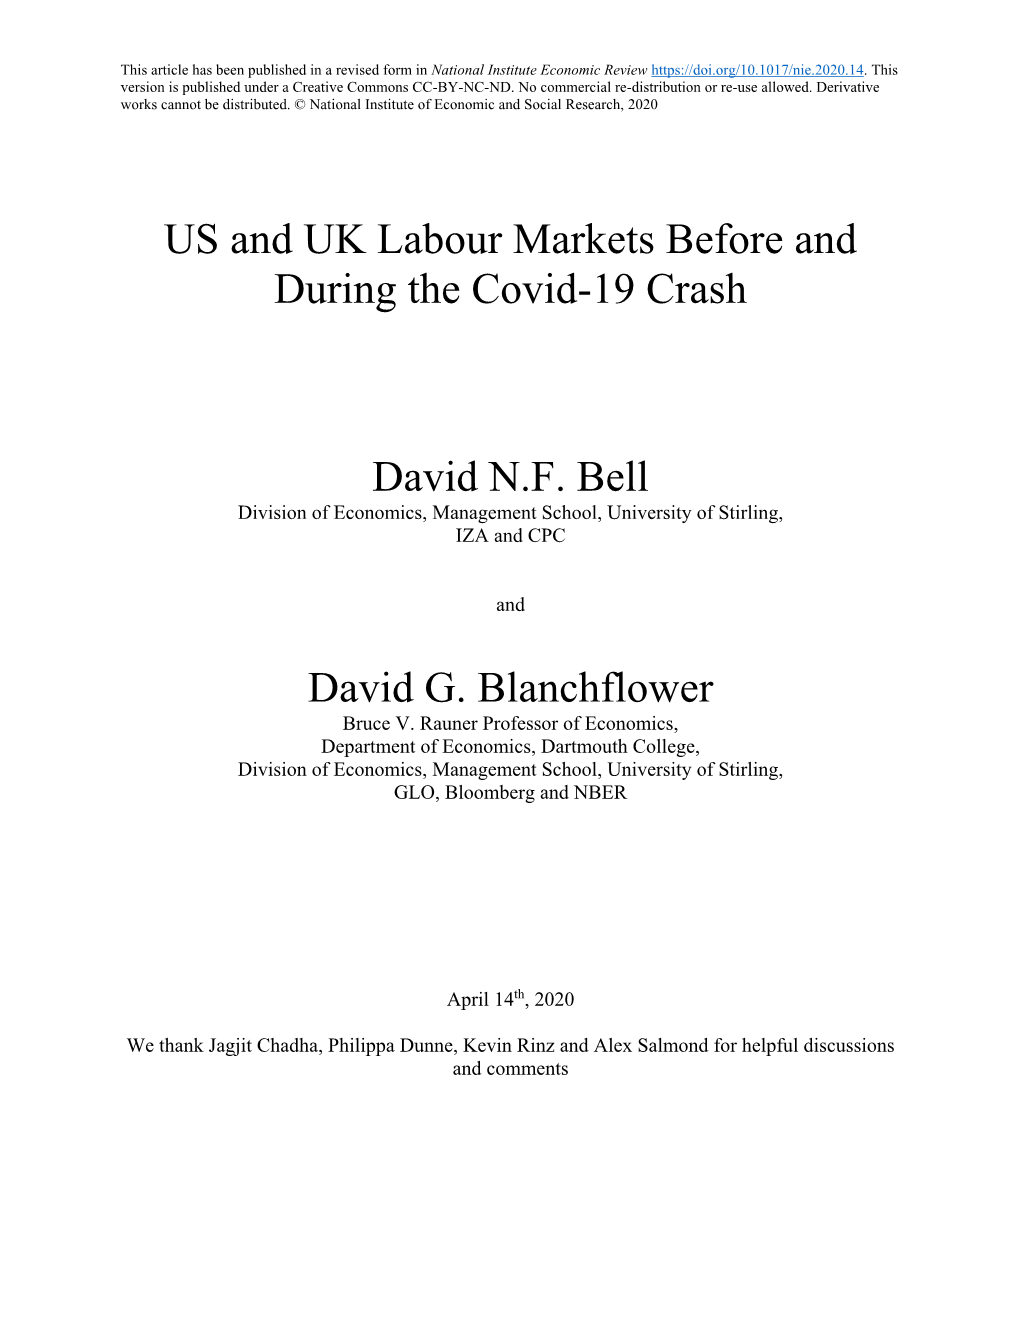 US and UK Labour Markets Before and During the Covid-19 Crash